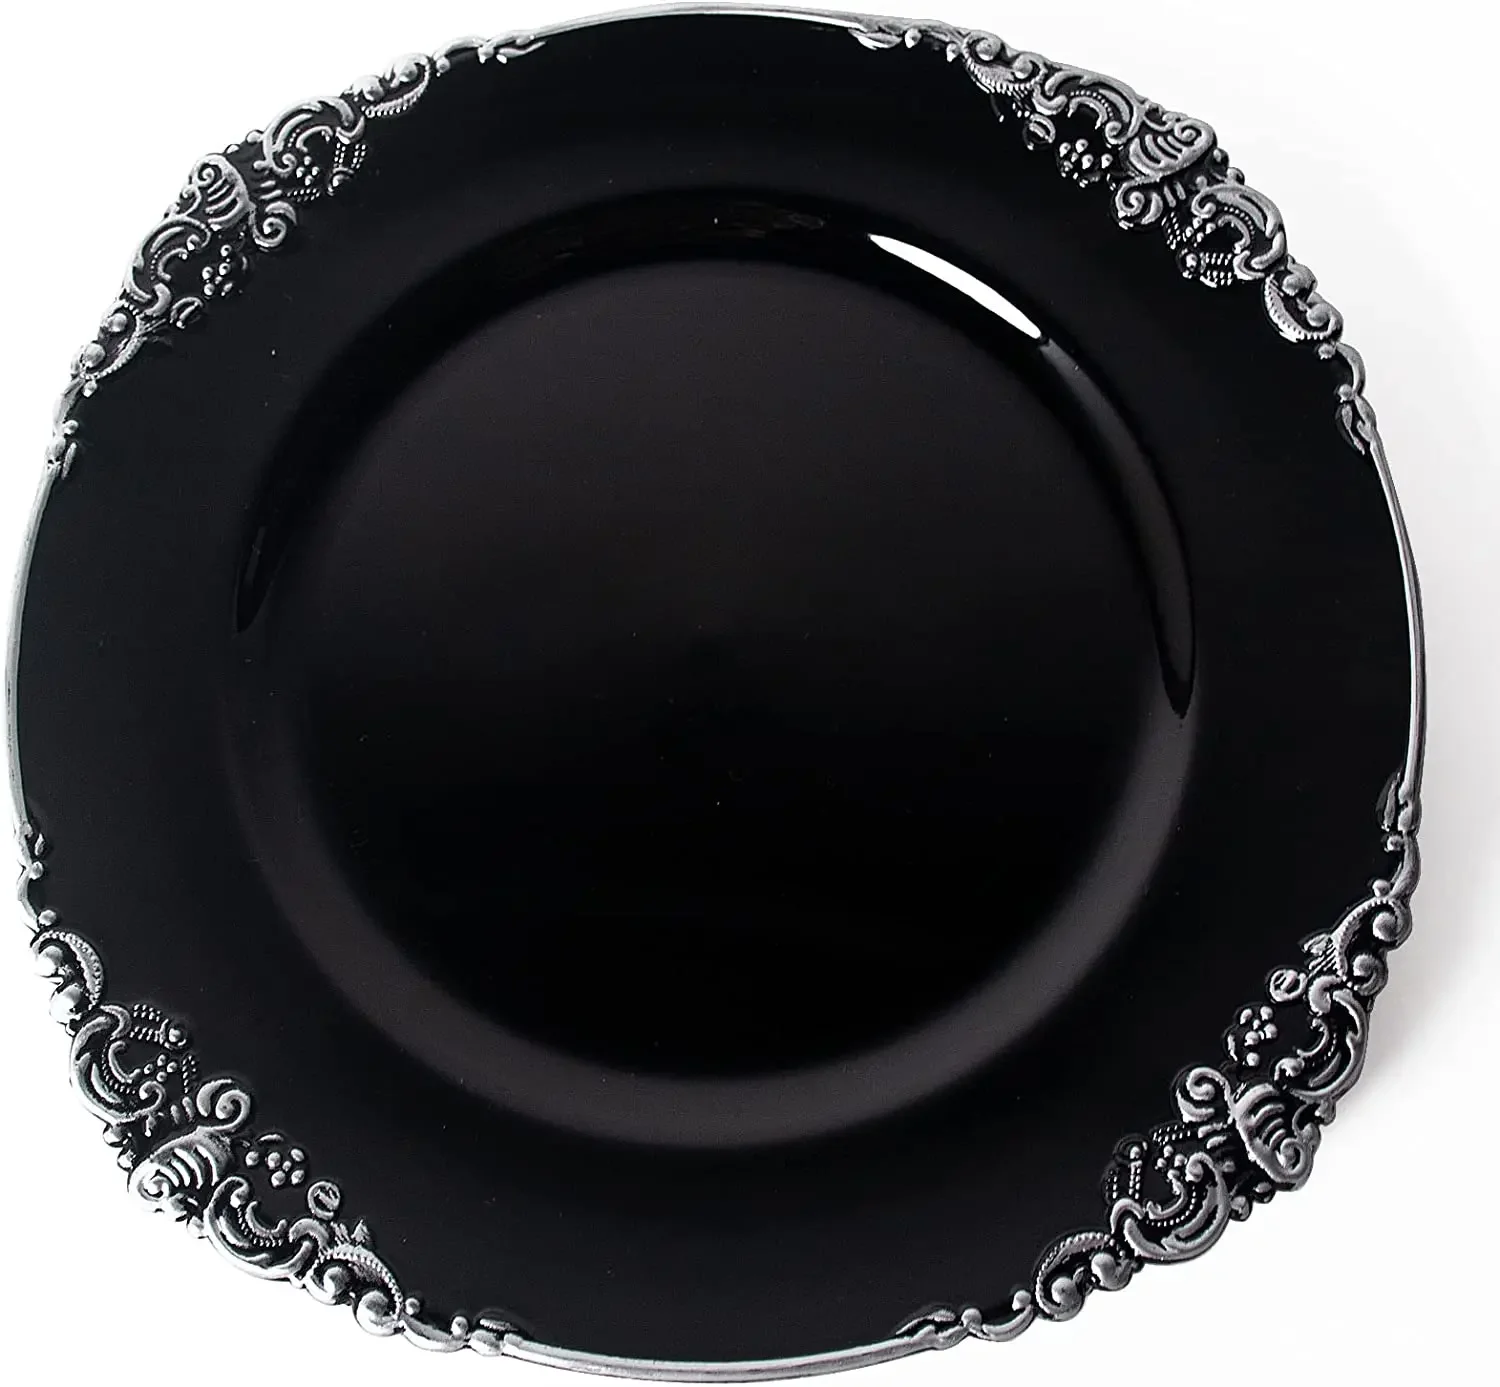 

4pcs Black Charger Plates with Silver Rim Edge, 13" Elegant Plastic Chargers for Dinner Plates for Table Decoration